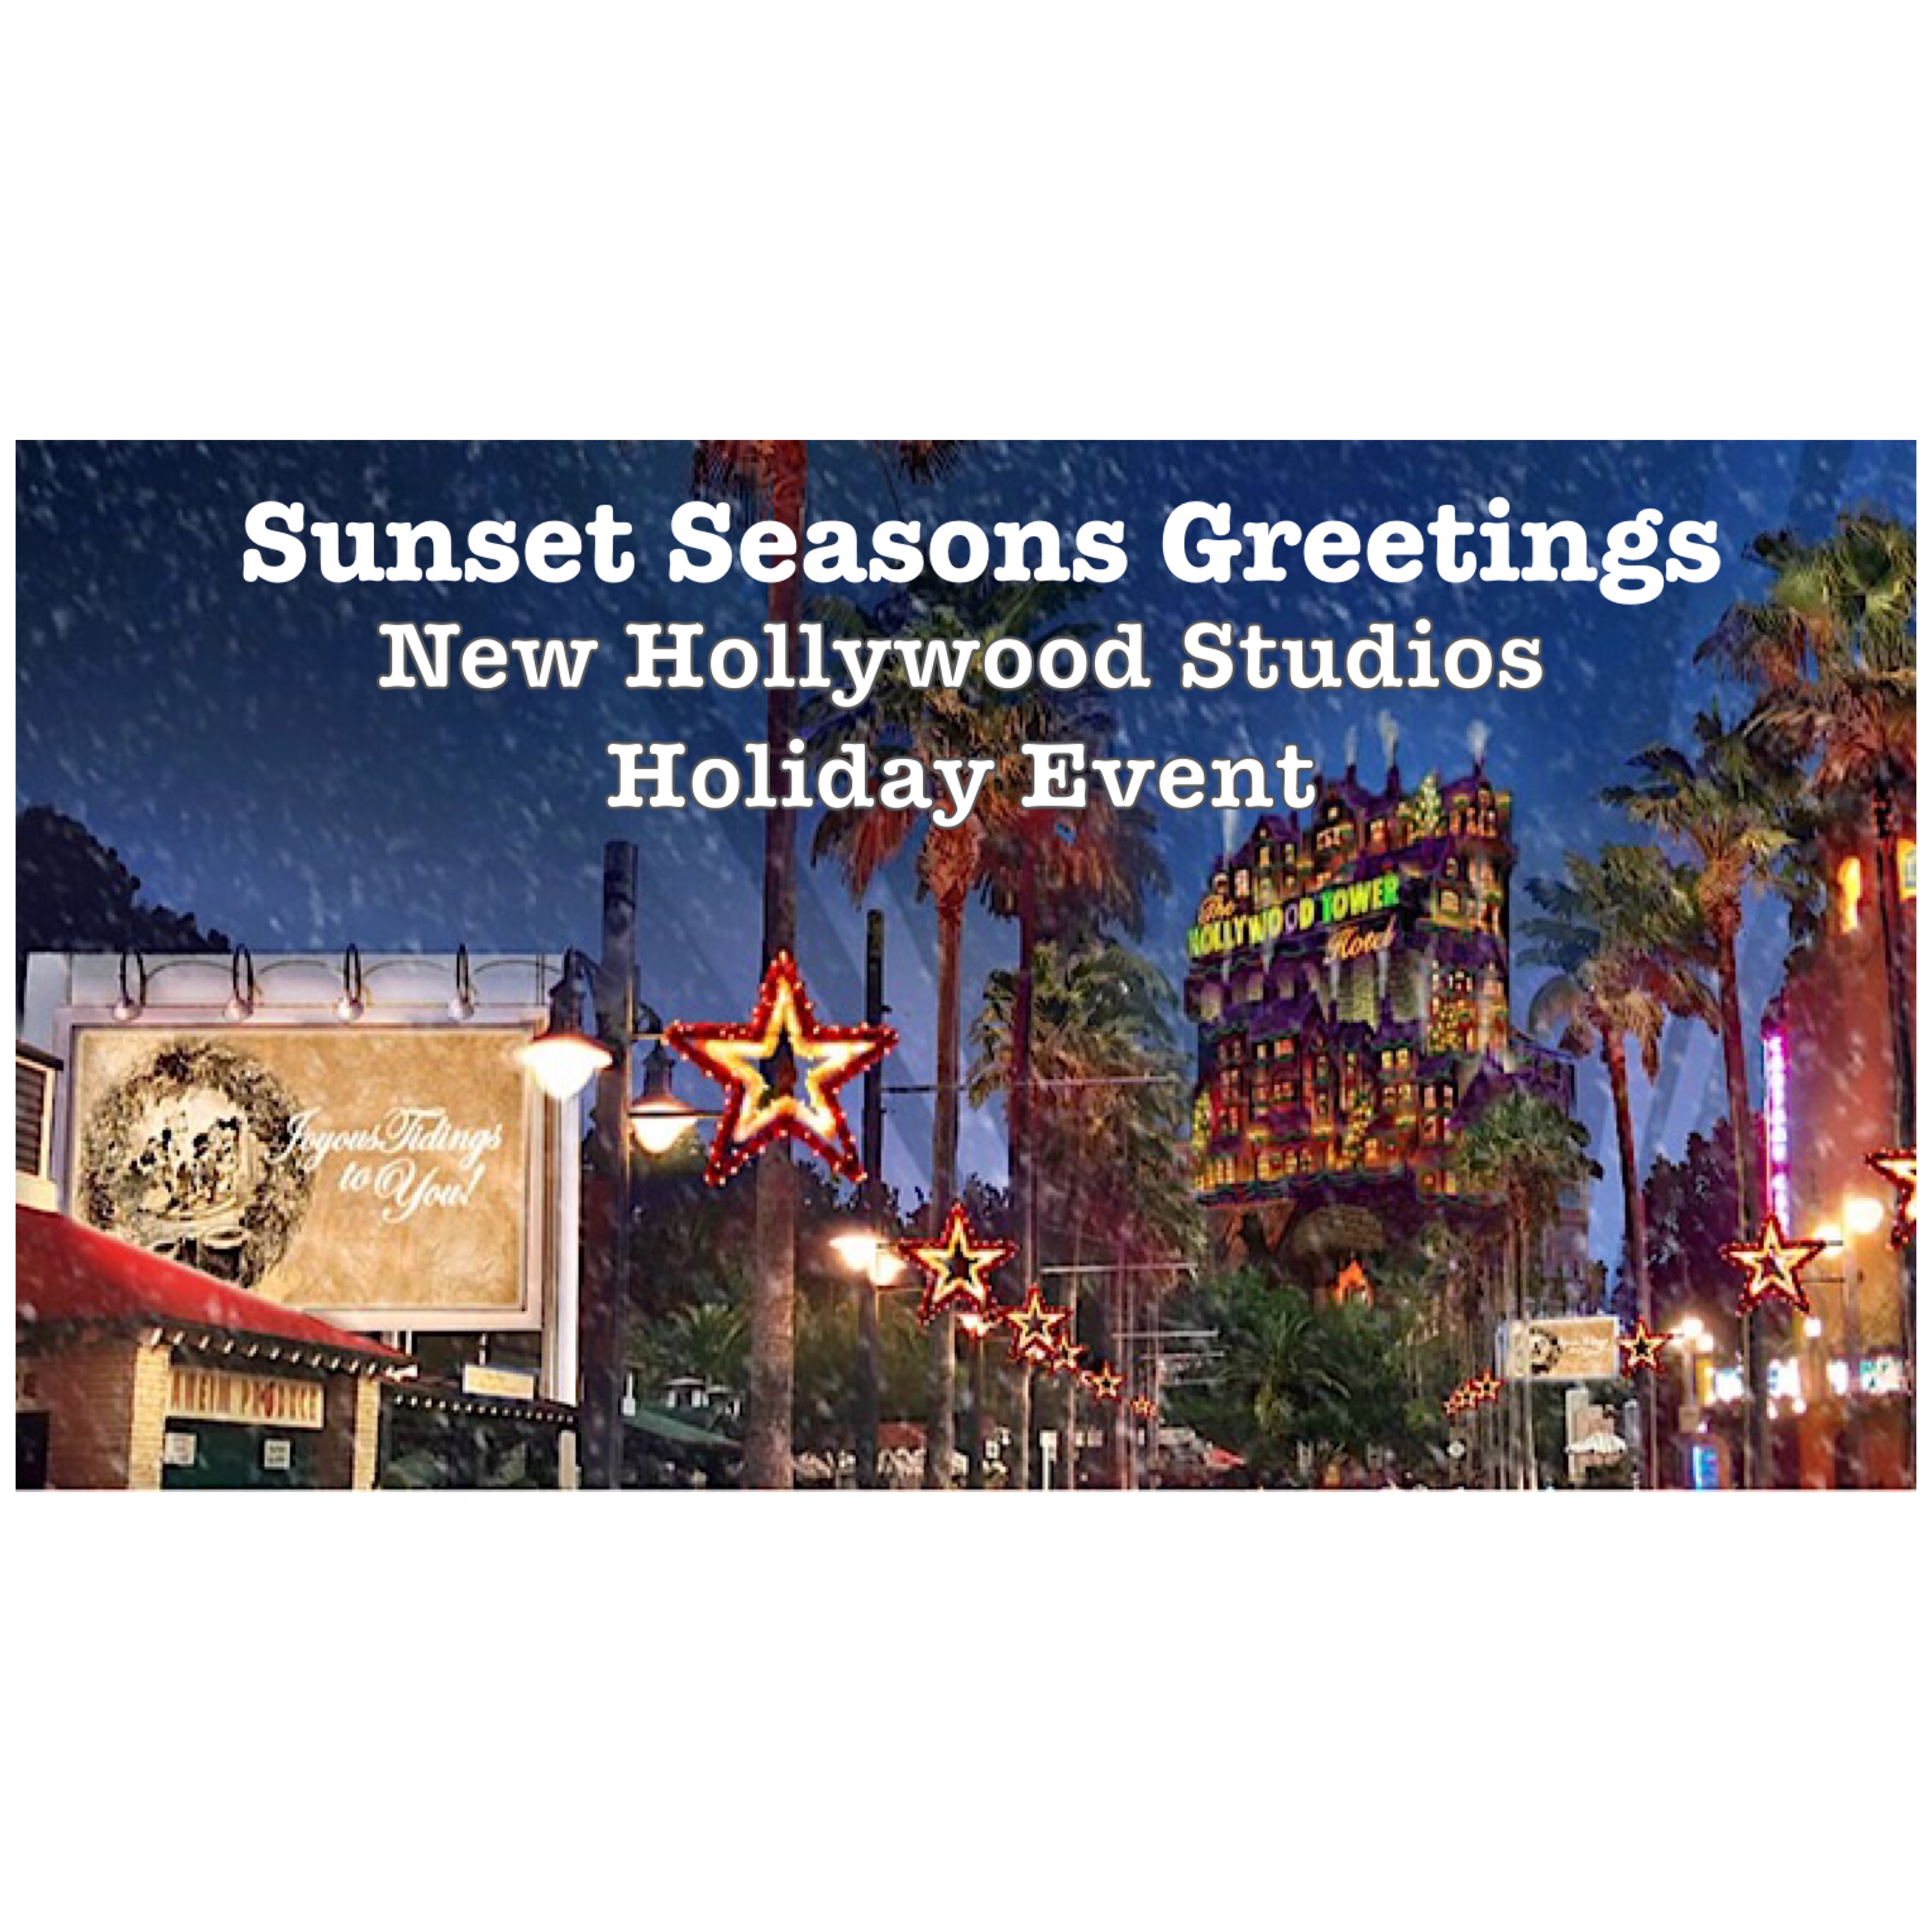 Sunset Seasons Greetings - New Hollywood Studios Holiday Event